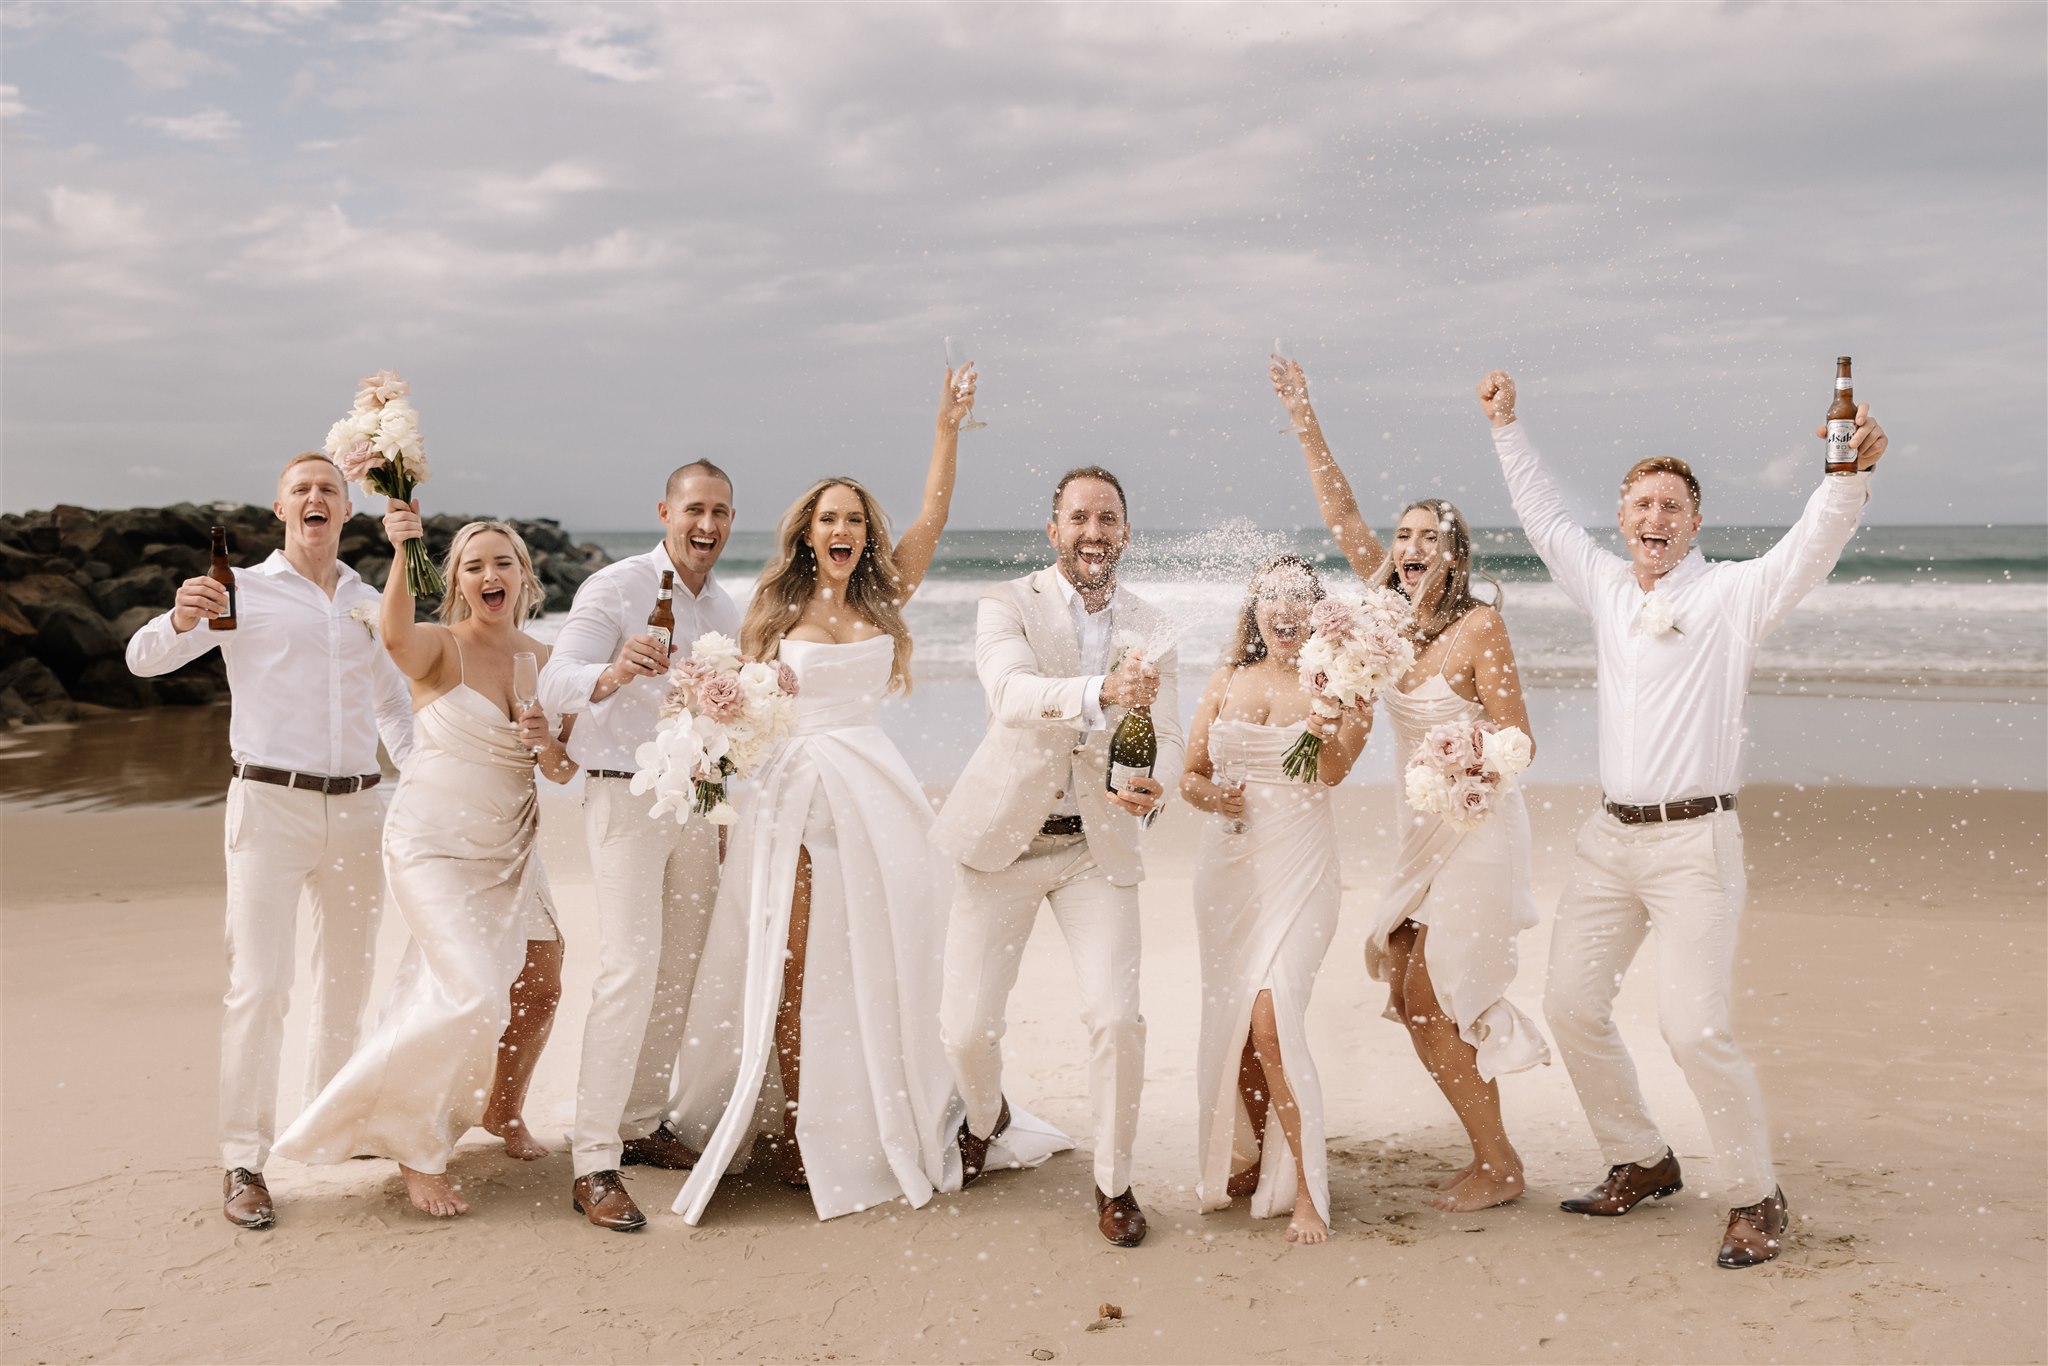 Our Tips for the Best Wedding Day Ever